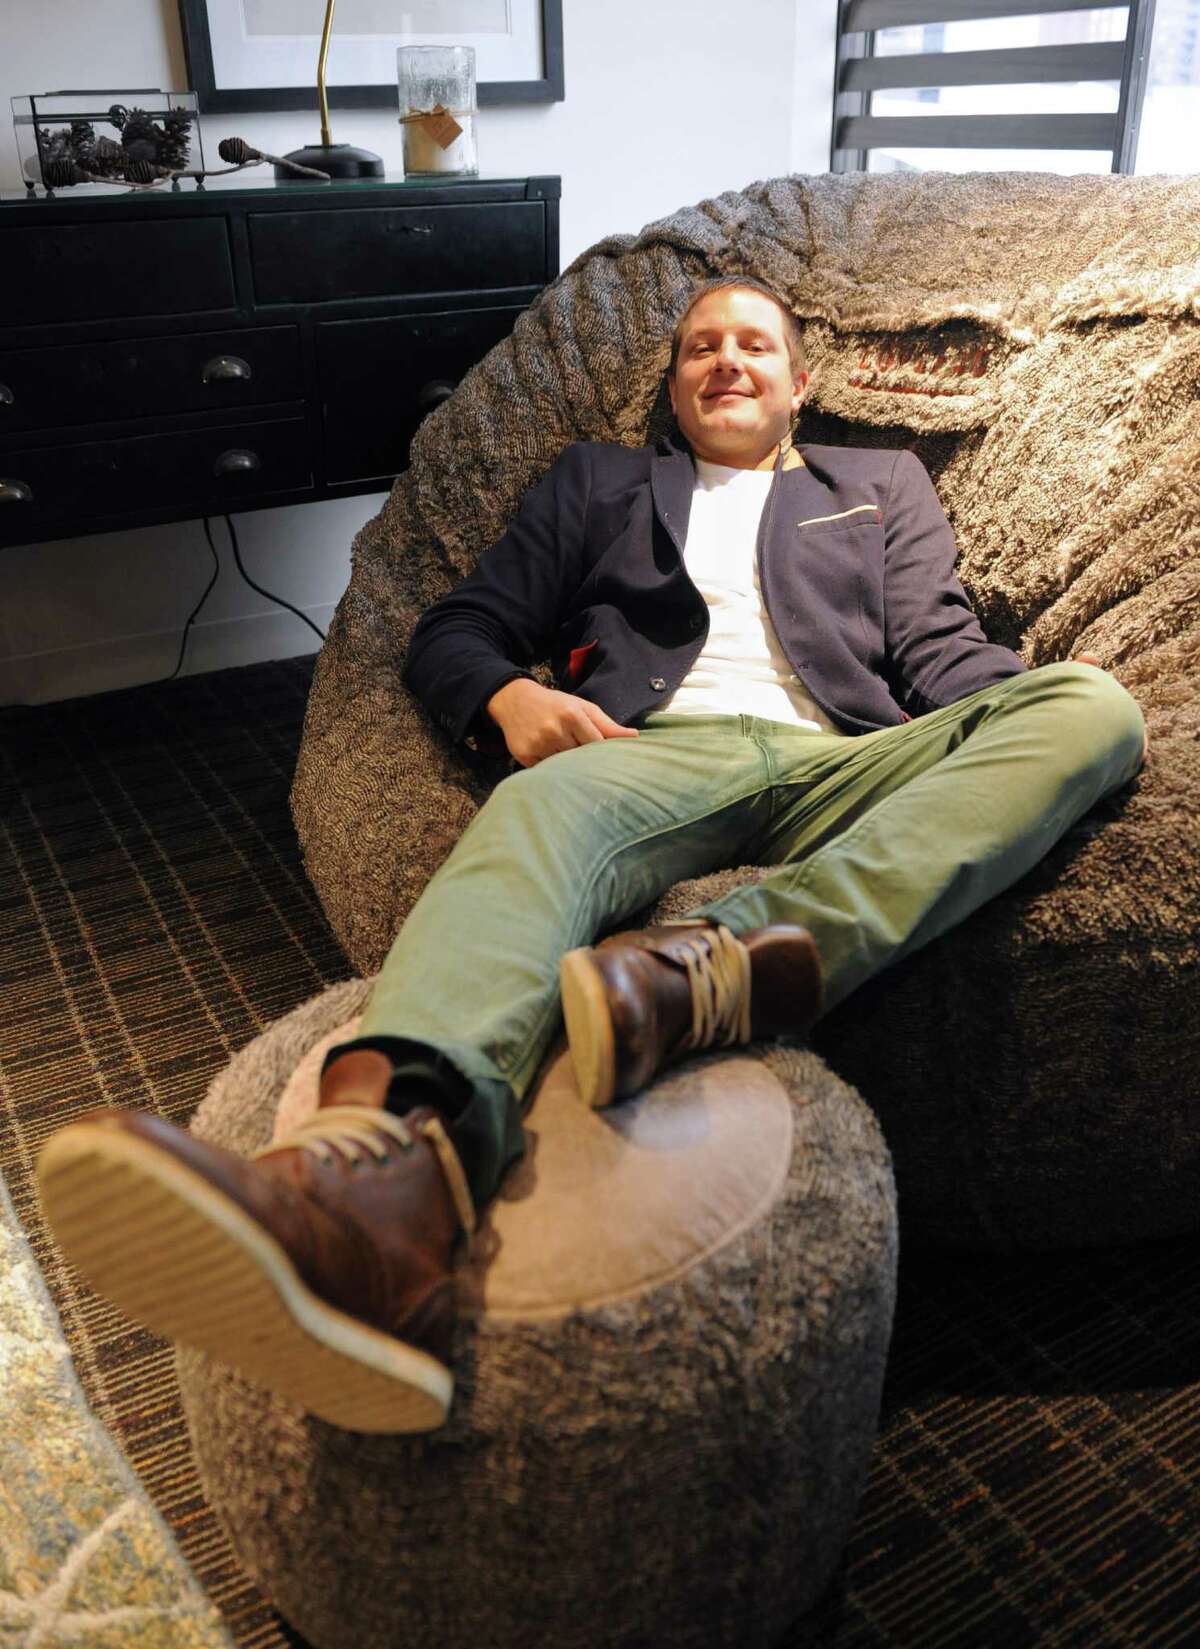 Lovesac founder Shawn Nelson lounges in a Lovesac at the new Lovesac Headquarters at 2 Landmark Square in downtown Stamford, Conn. Tuesday, Dec. 23, 2014. Lovesac and its team of about 50 employees moved from the undersized office on Canal Street the new, spacious Landmark Square location about a month ago. The new office and showroom incorporates Lovesac's "sactional" modular furniture for employees' work spaces.